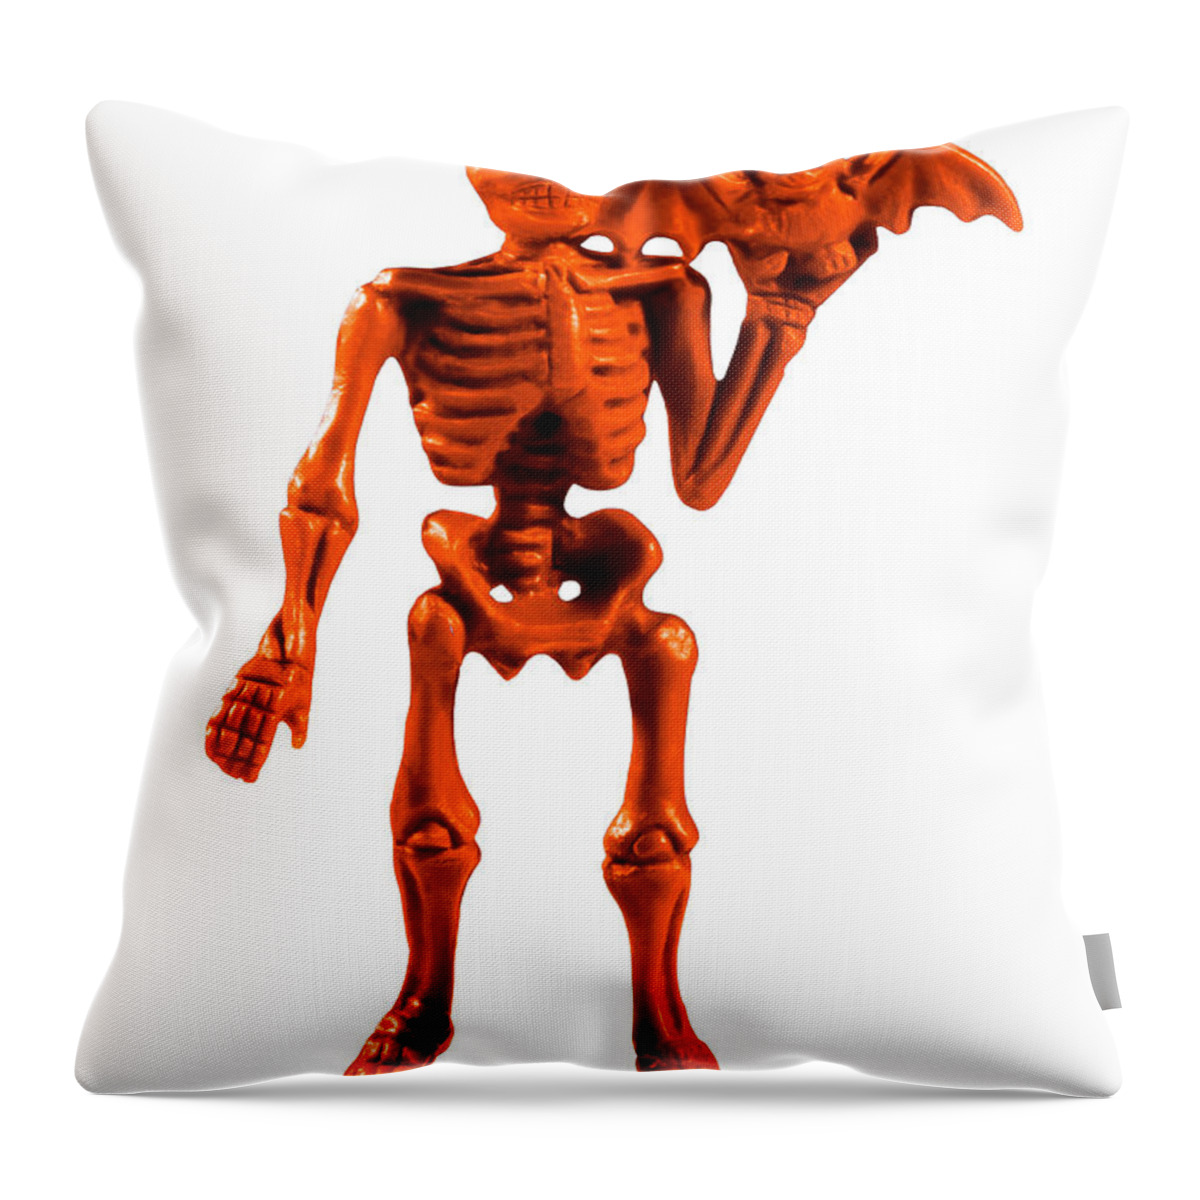 Afraid Throw Pillow featuring the drawing Orange Skeleton Holding Bat by CSA Images